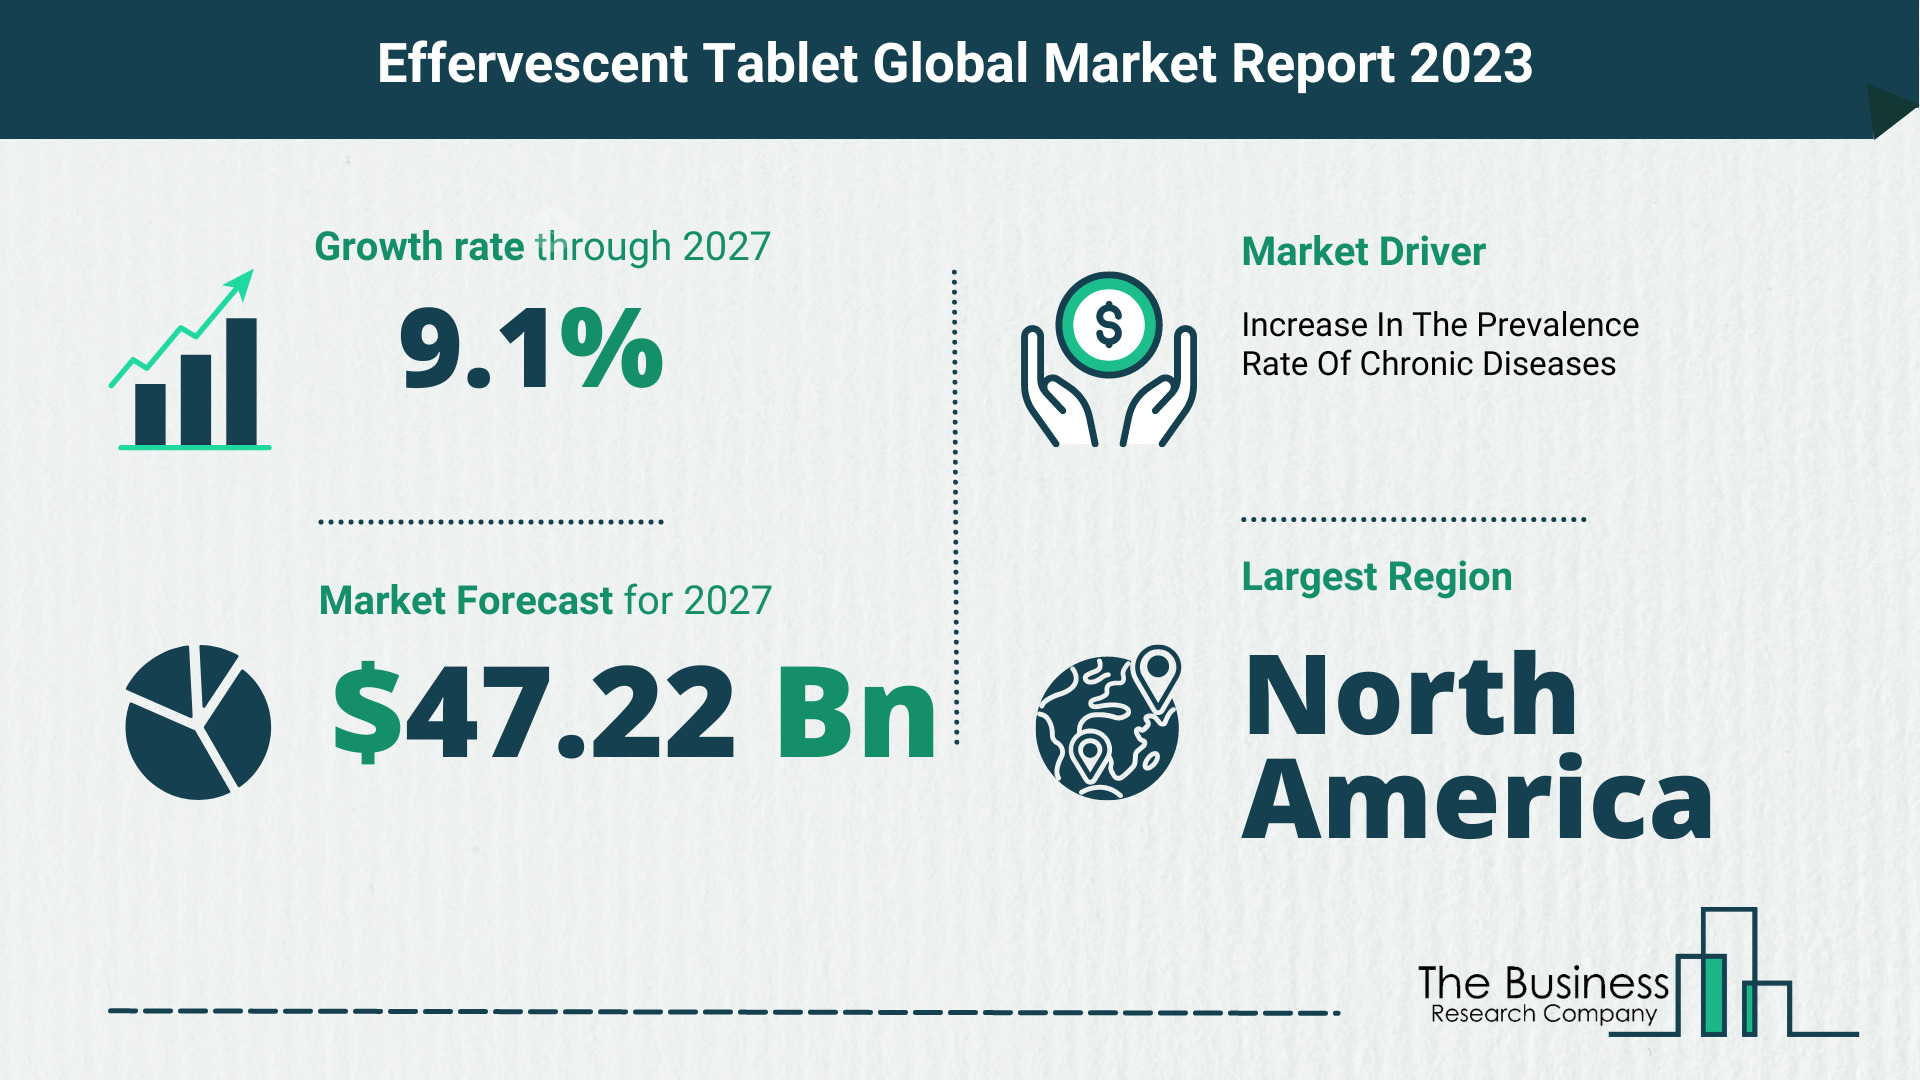 Effervescent Tablet Market Forecast 2023-2027 By The Business Research Company